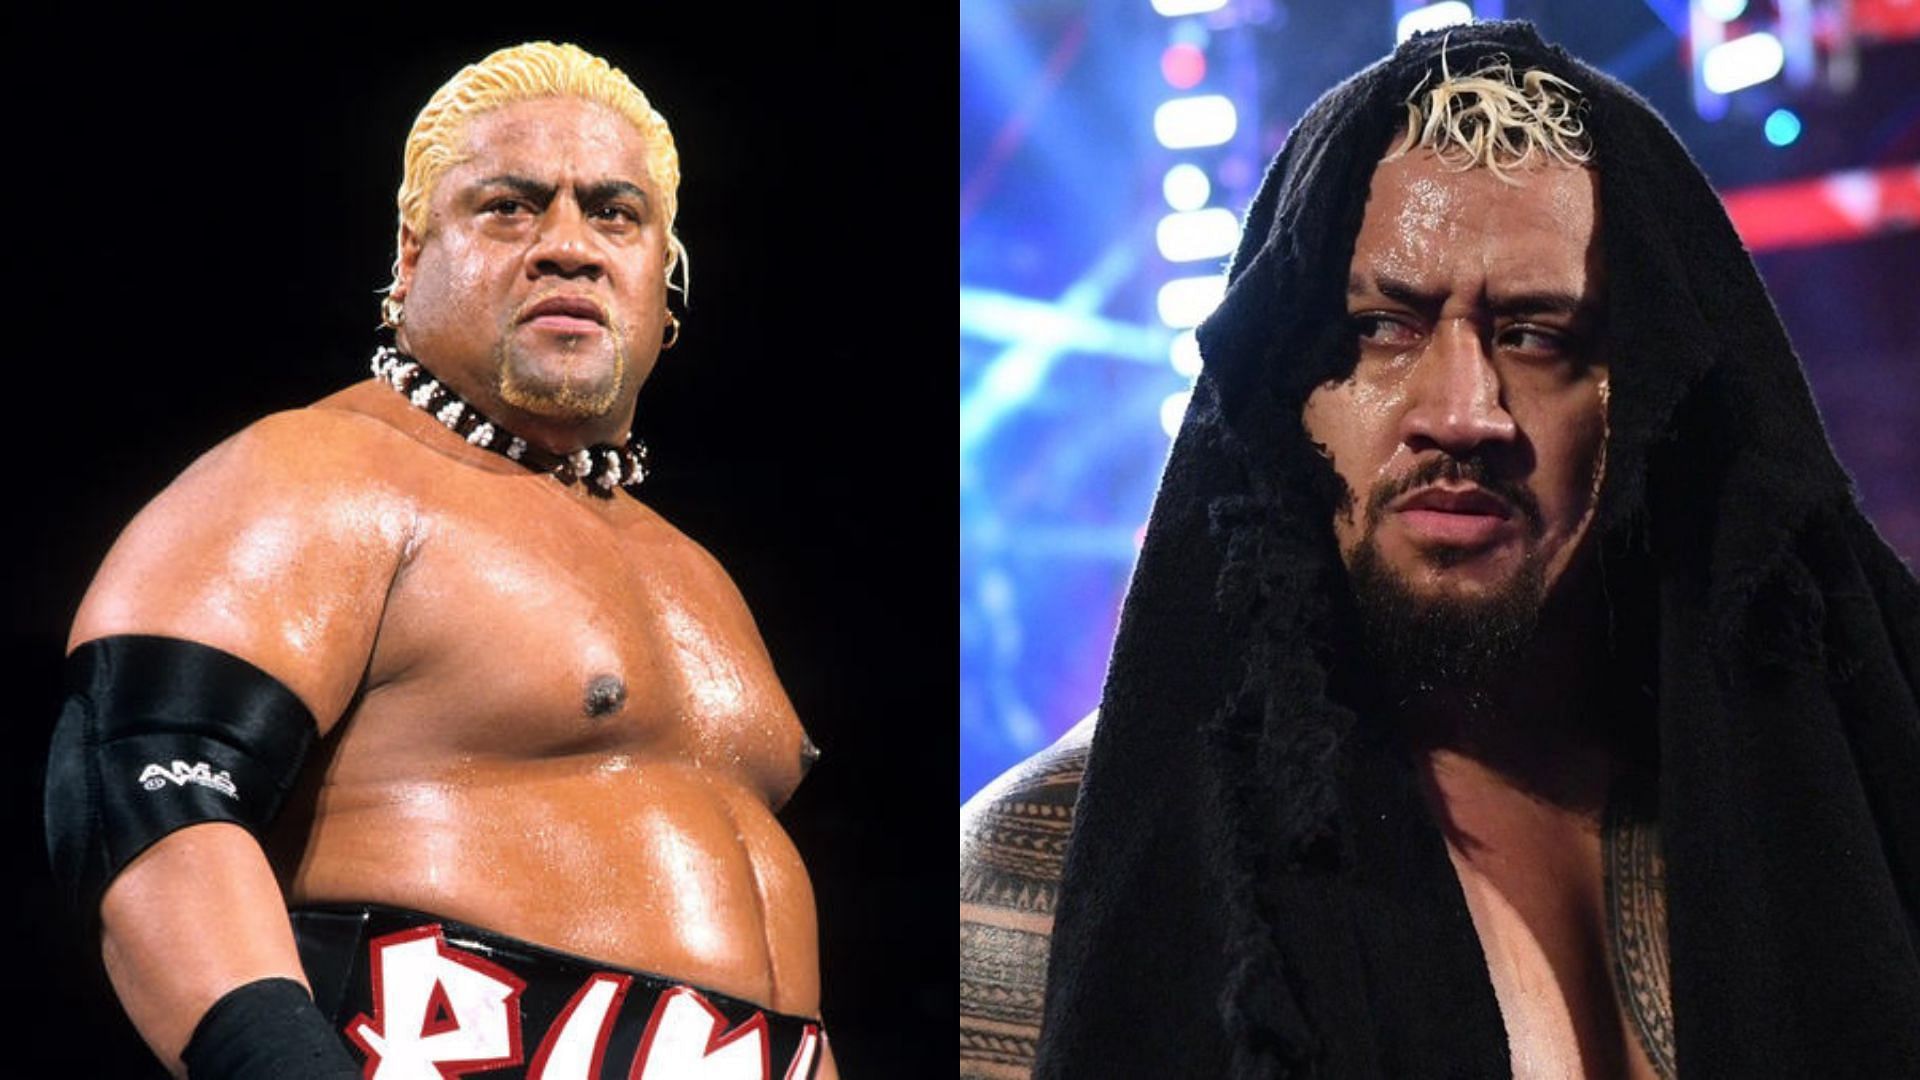 Rikishi sent a short message to his son, via Instagram